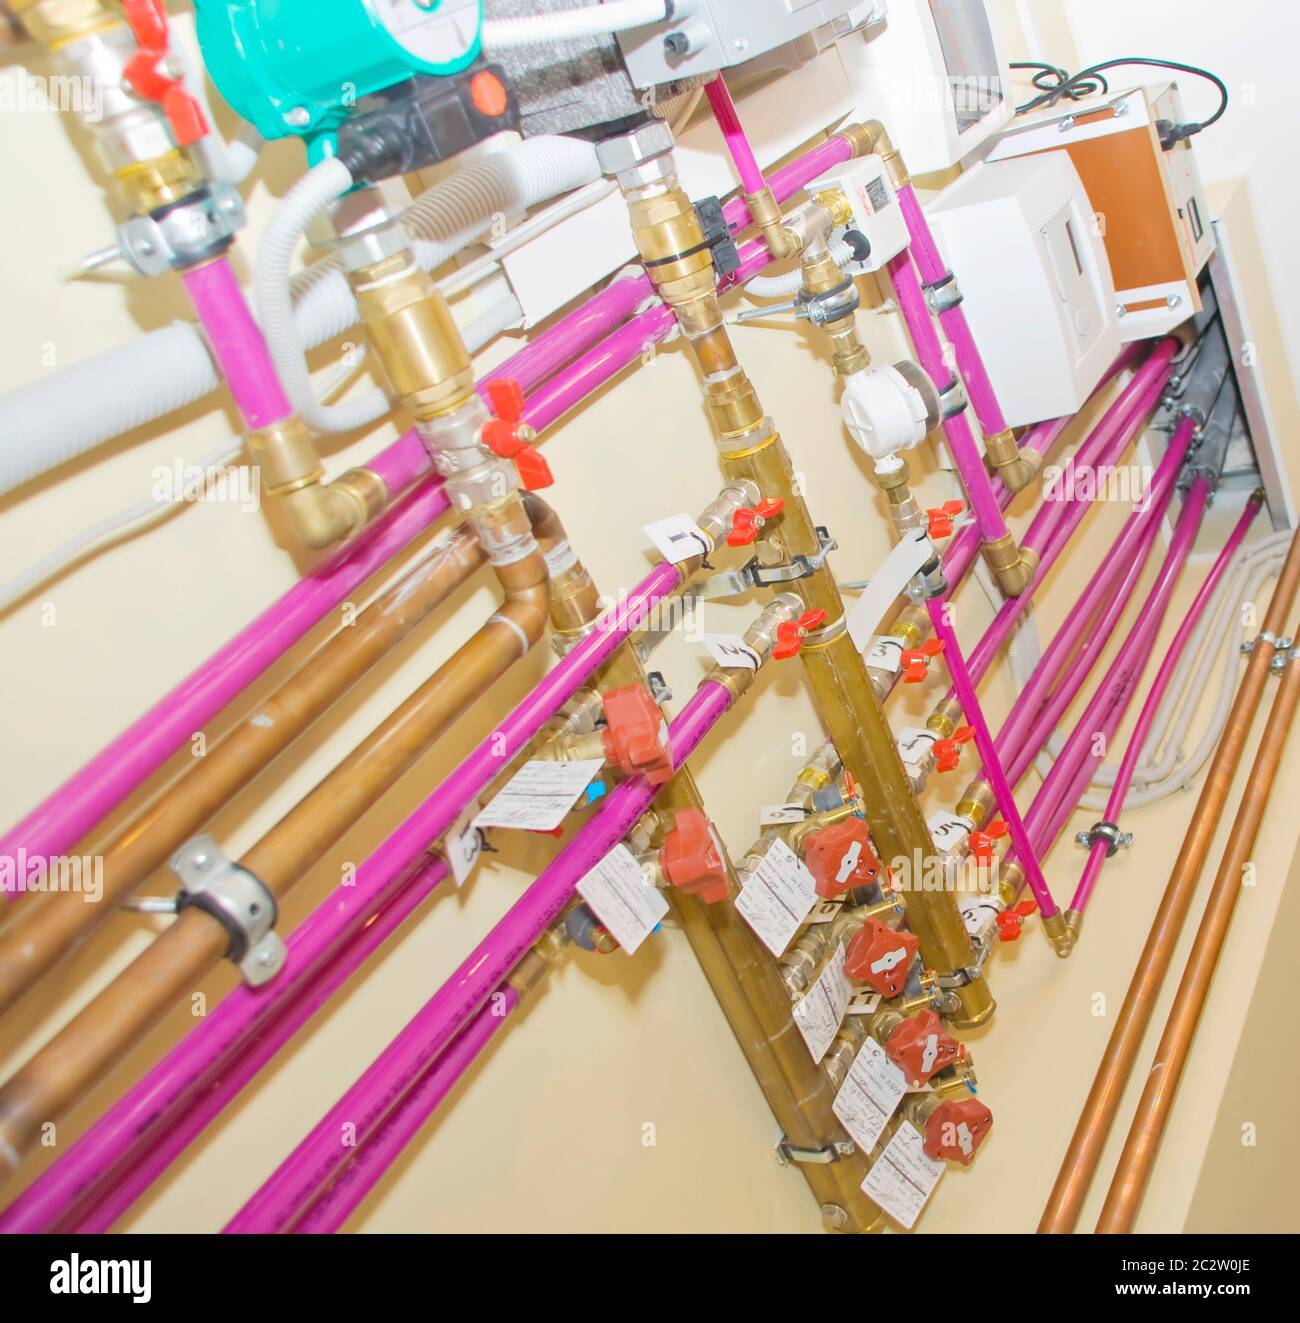 Heating system. Tubes and valves Stock Photo